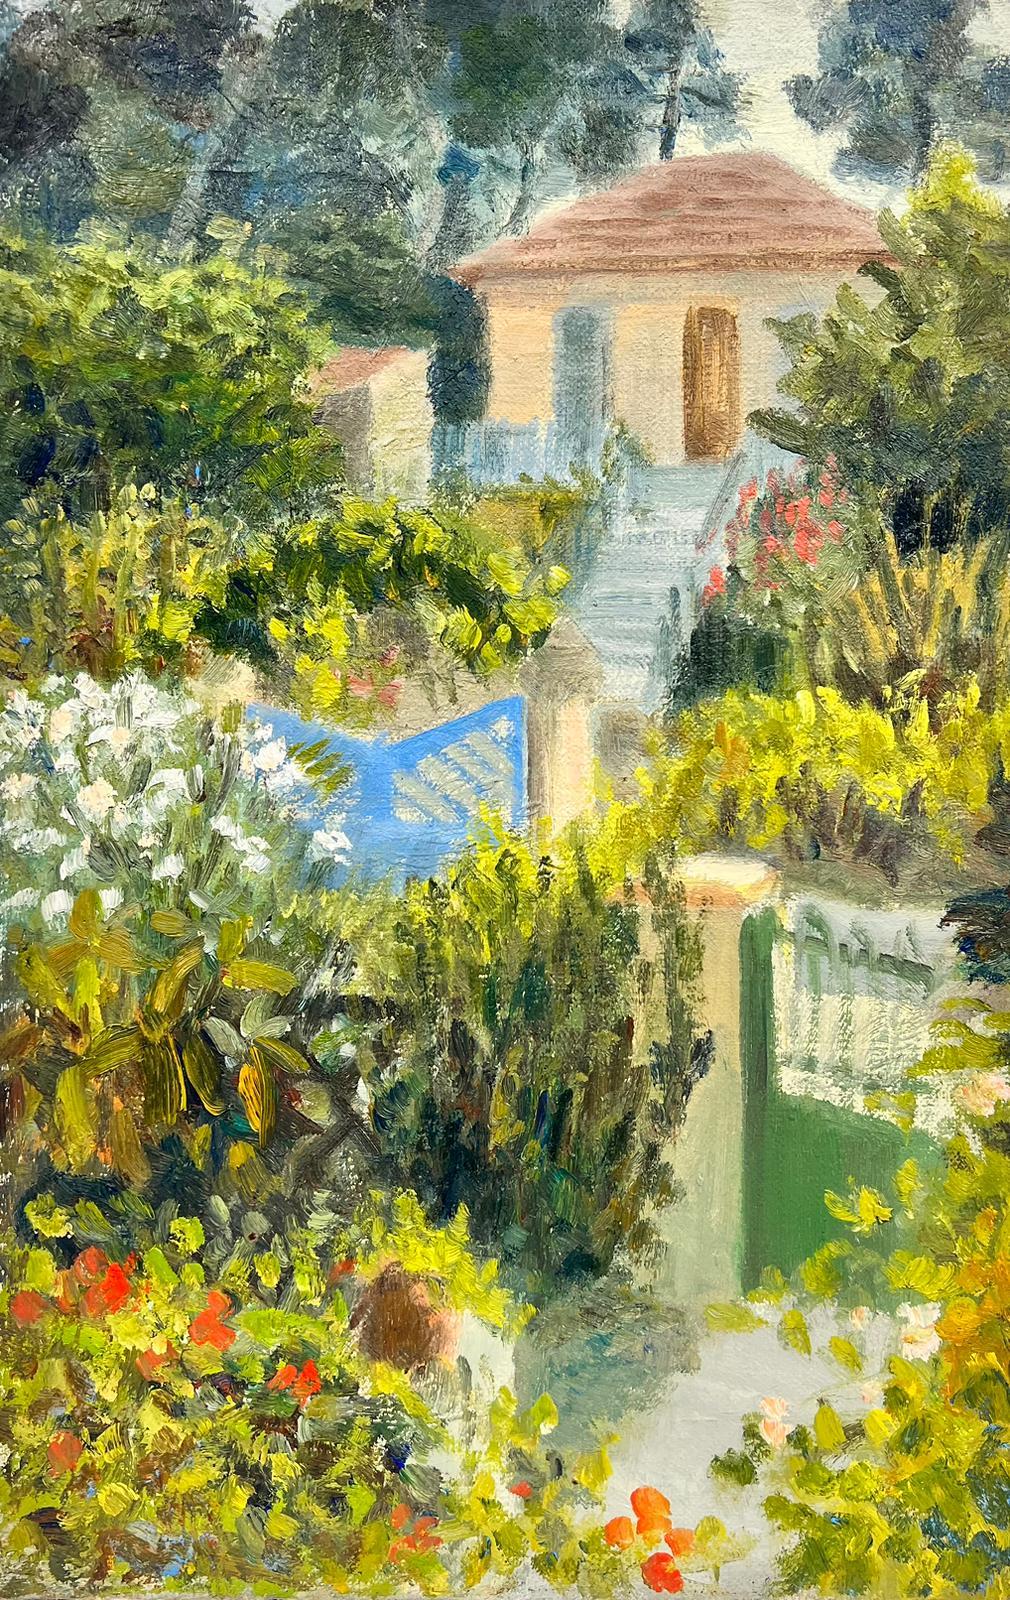 Josine Vignon Landscape Painting - The Pathway To The House In The Green Garden Landscape Oil